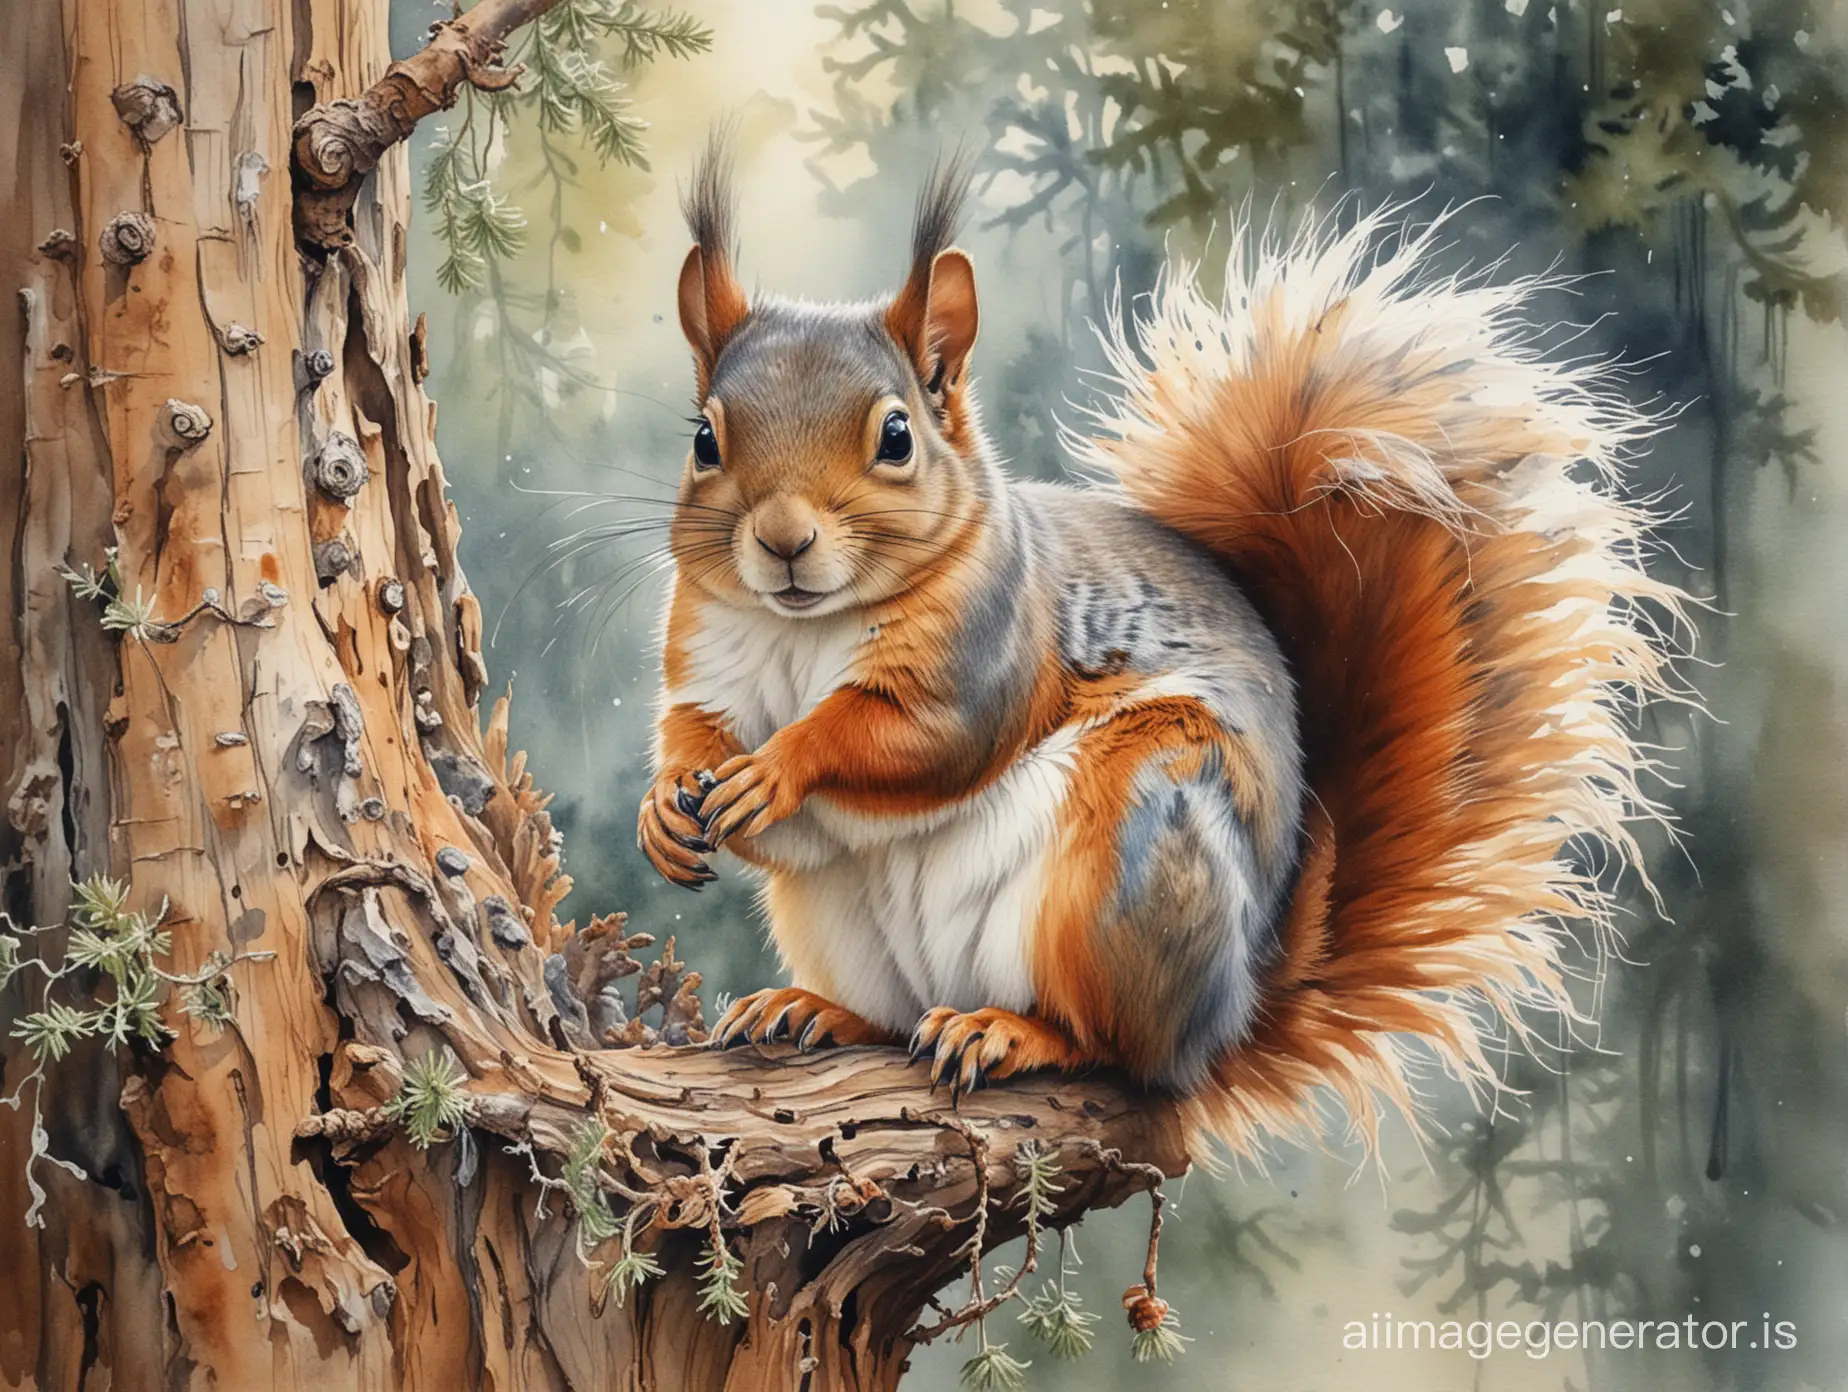 watercolour. A beautiful squirrel with fluffy highlighted fur and long tassels on his ears sits on a branch of an old gnarled pine tree